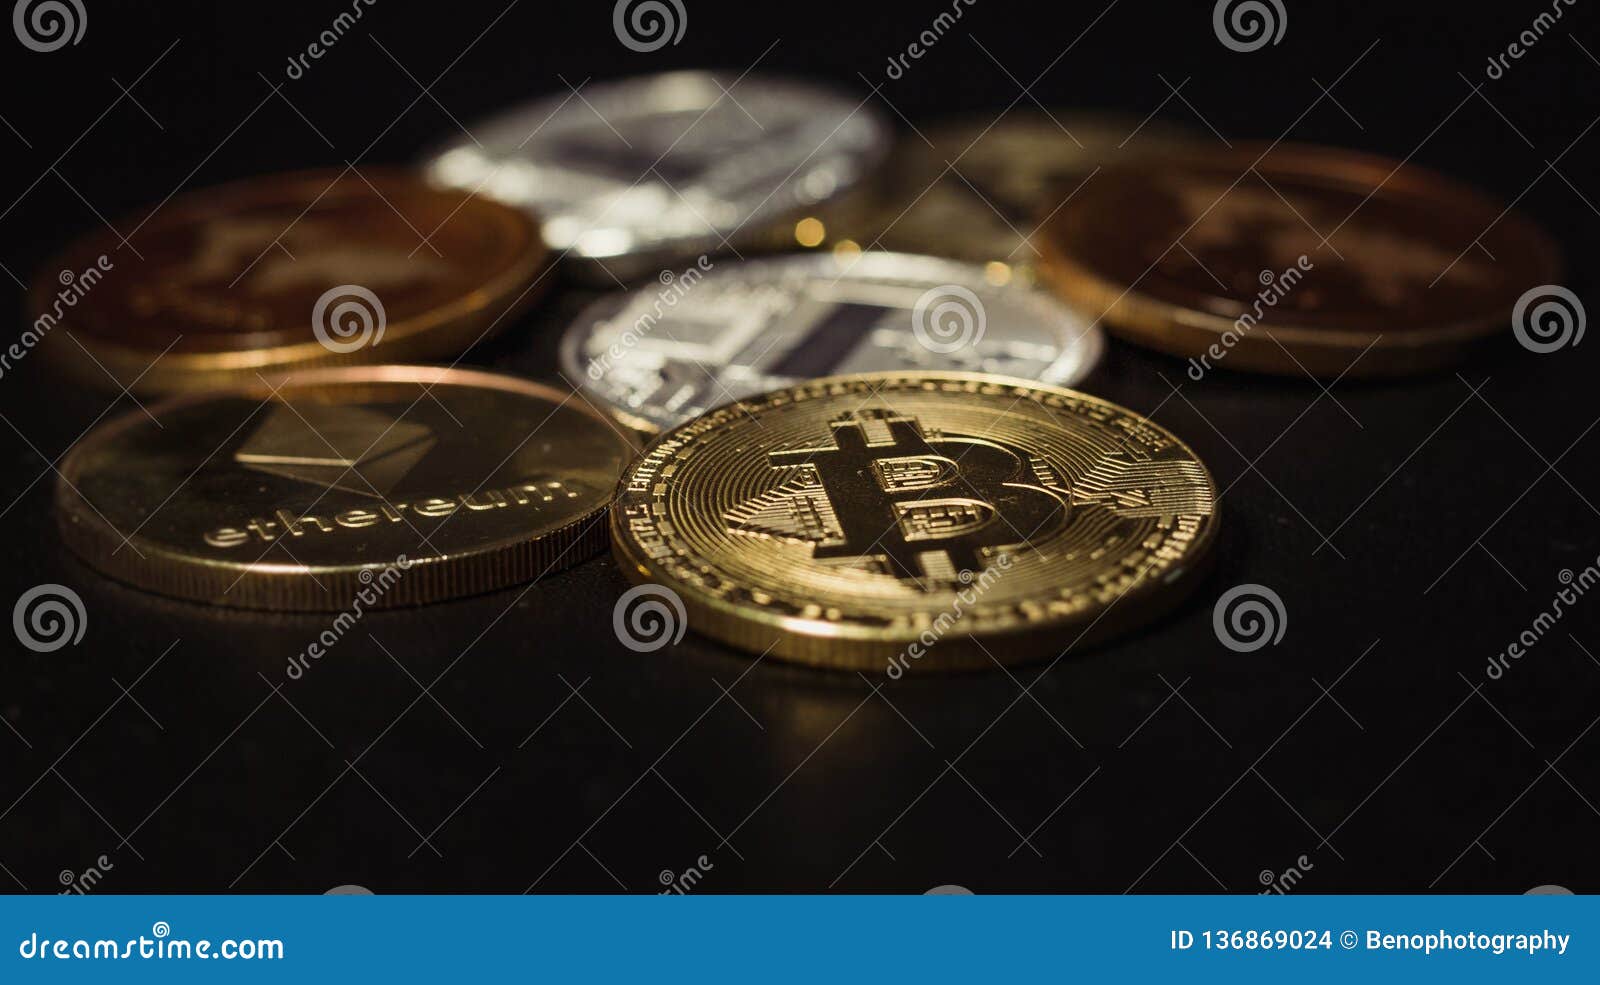 family wealth crypto currency